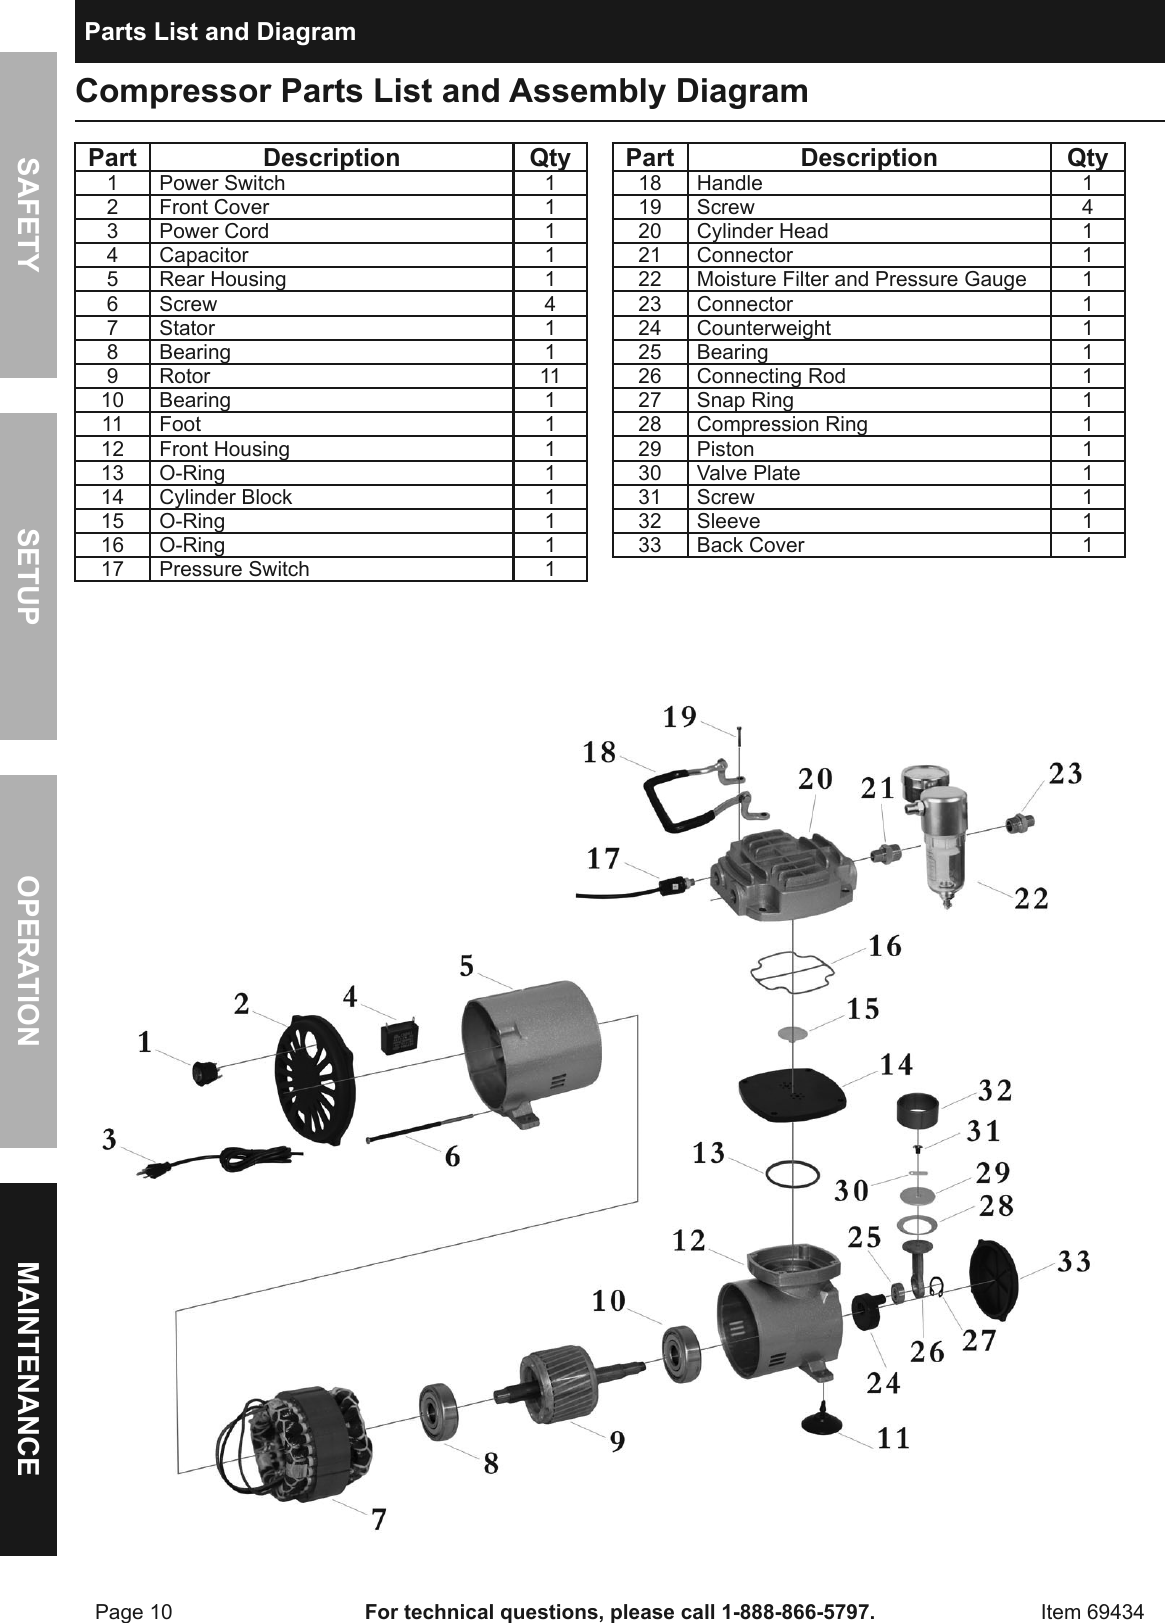 Page 10 of 12 - Manual For The 69434 1/5 Horsepower, 58 PSI Airbrush Compressor And Kit